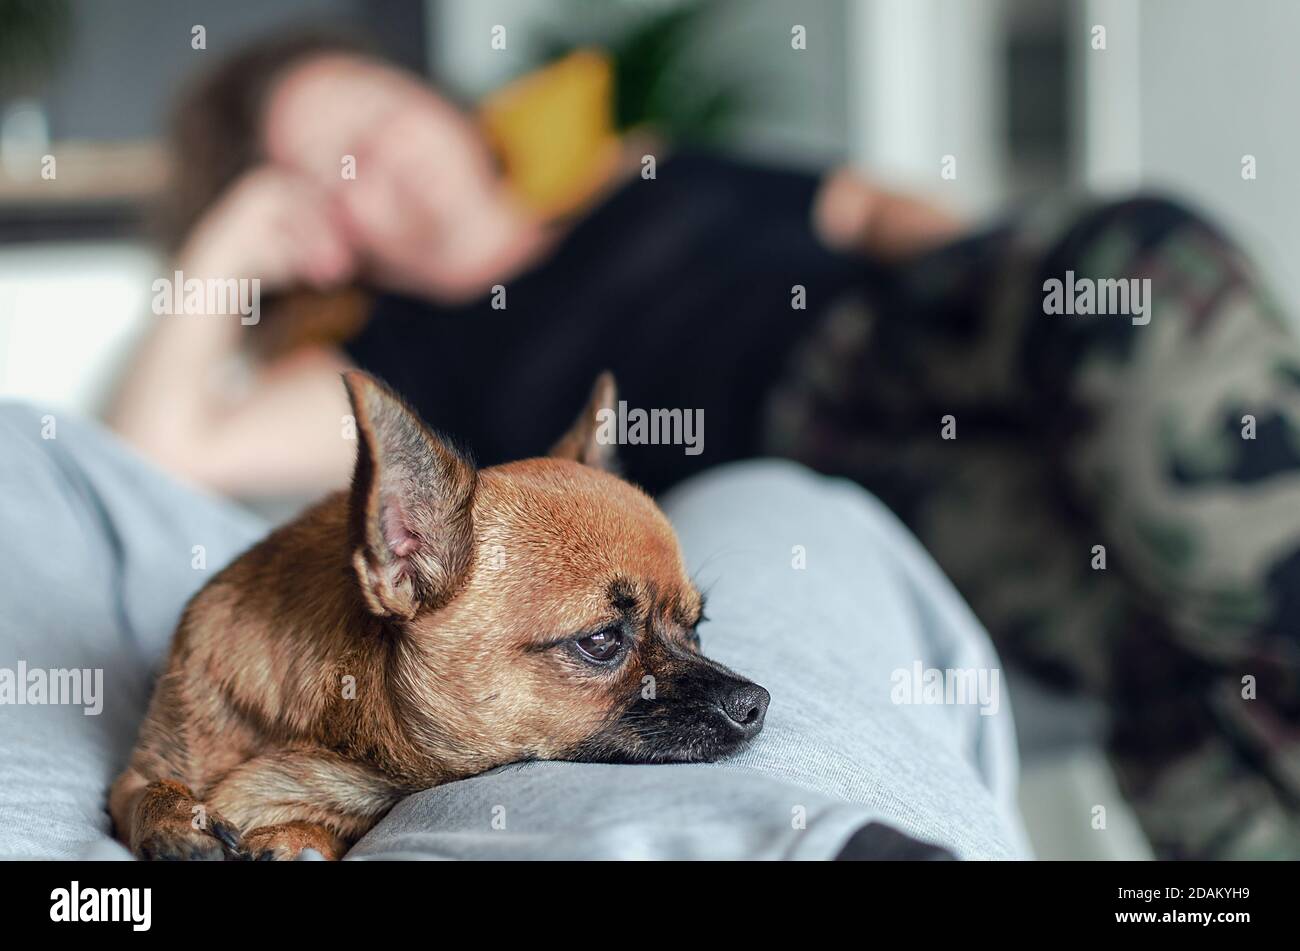 Selective focus on a cute chihuahua lying between owner's legs.  Blurred background of a caucasian woman resting on a couch. Indoor. Stock Photo